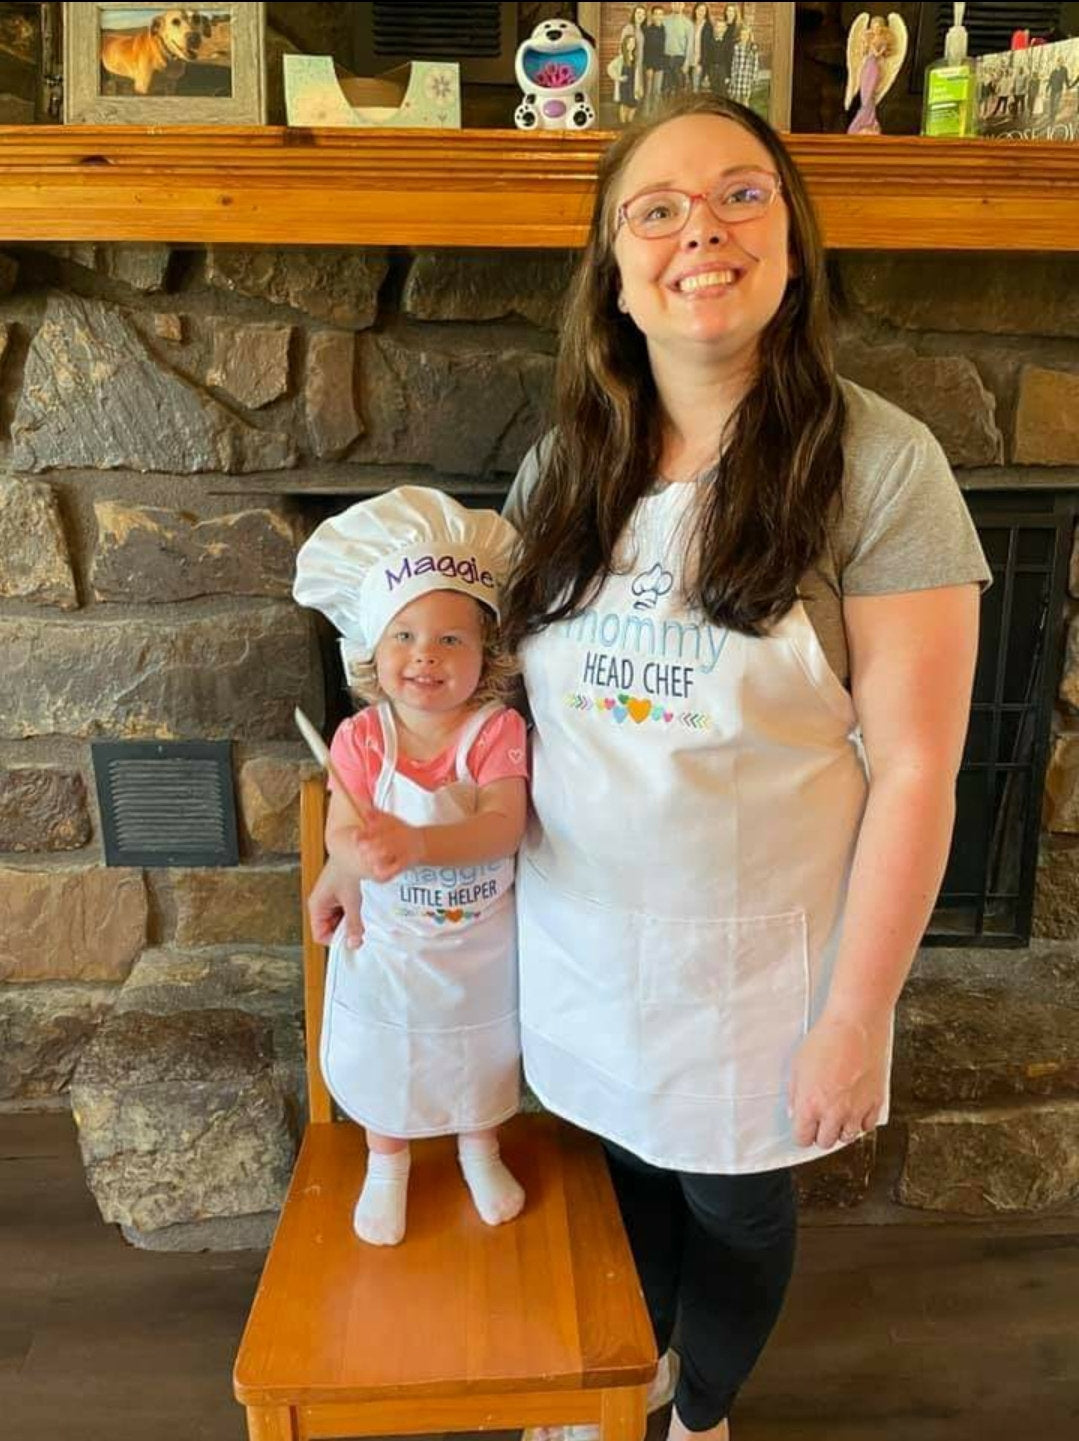 Personalised Best Mom Embroidered Apron